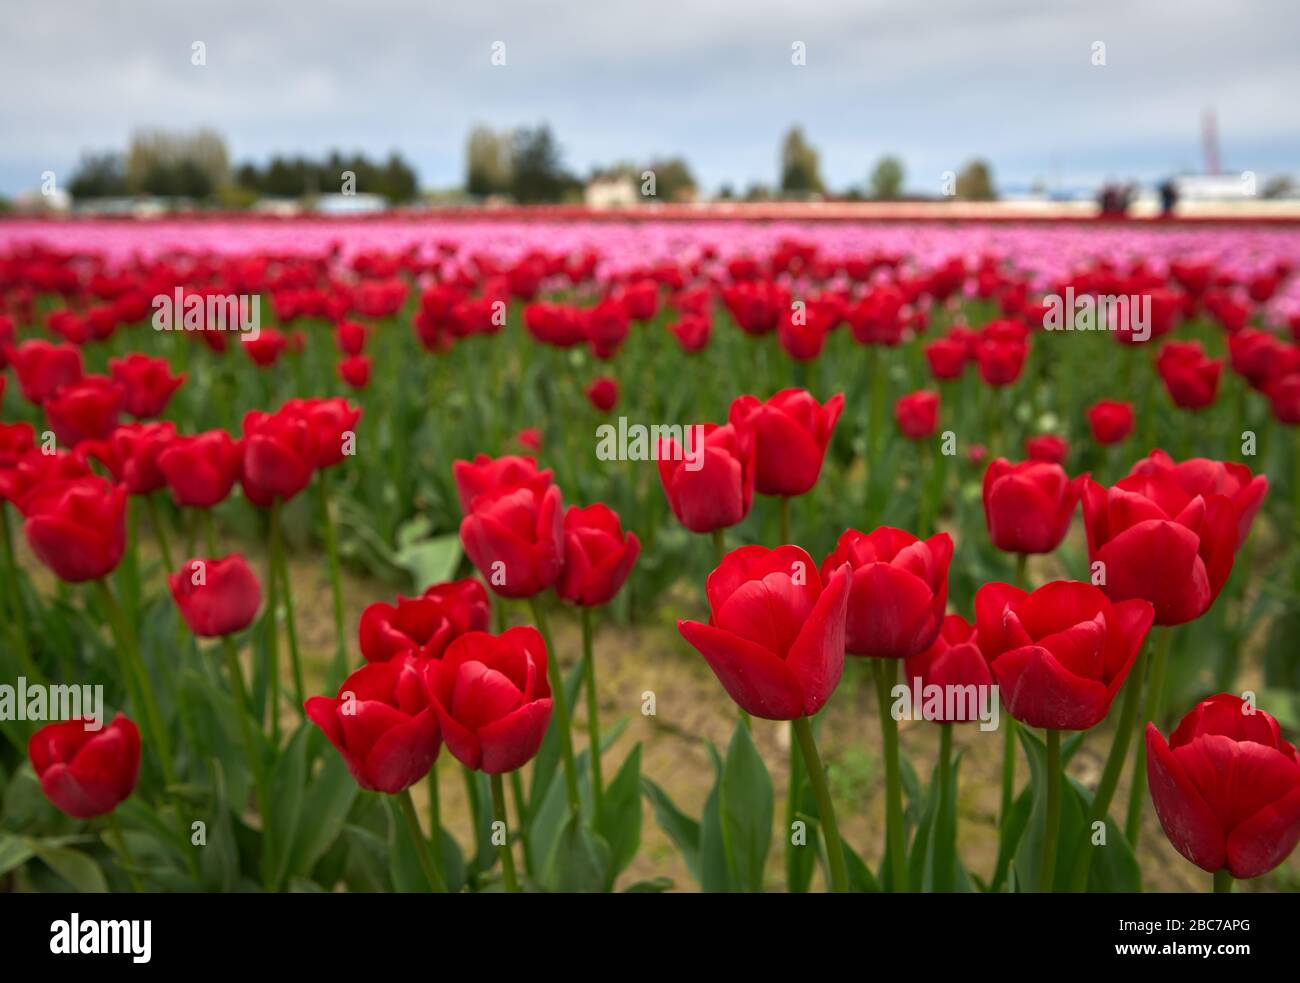 Red Tulips Agriculture Field. Bright, red tulips at their peak in a field. Stock Photo